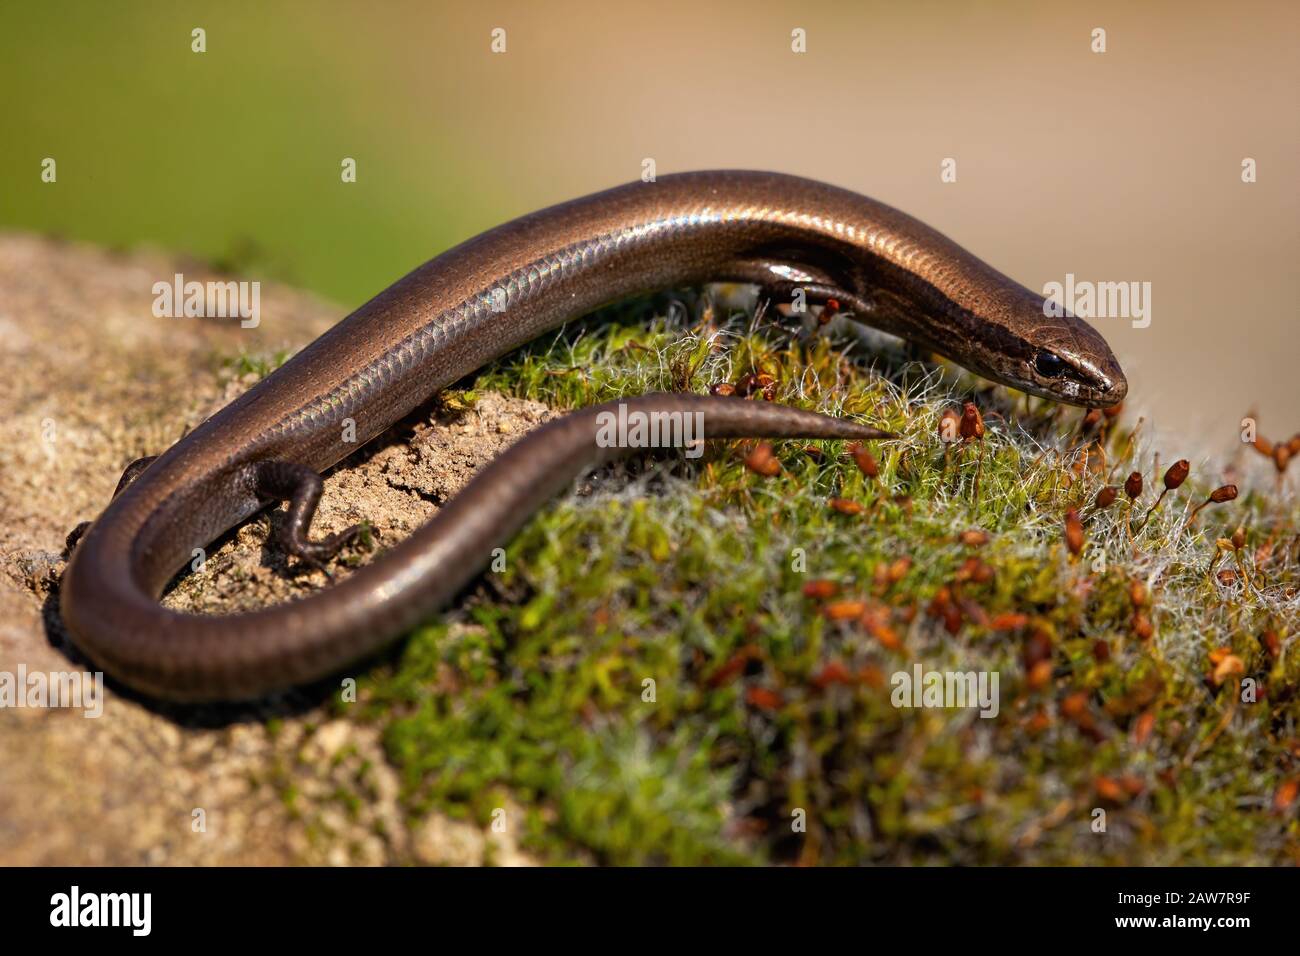 European copper skink, ablepharus kitaibelii, on a green moss in nature Stock Photo